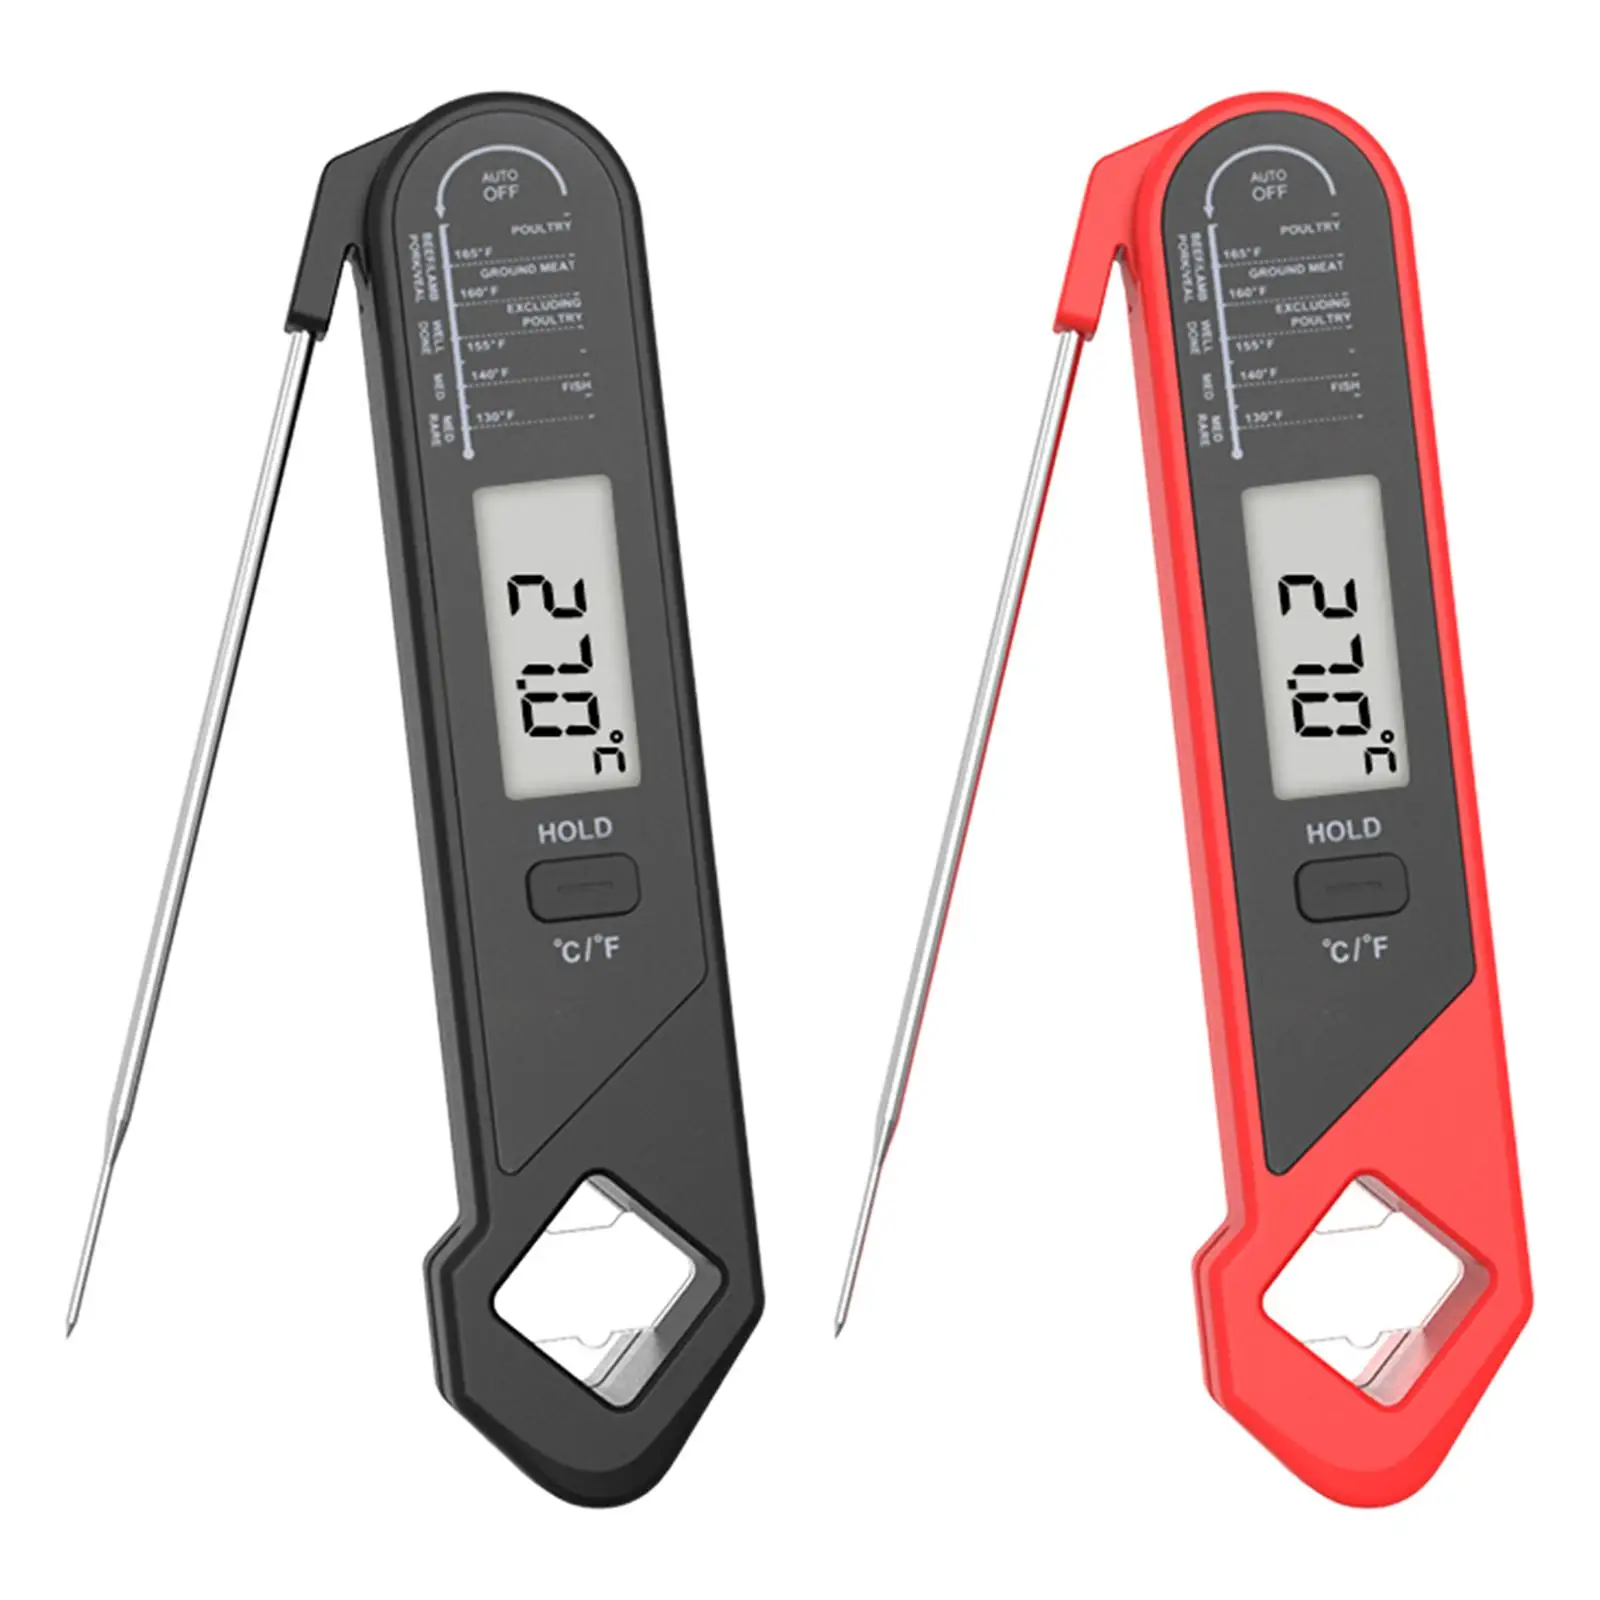 

Digital Food Thermometer, with Temperature Probe -50°C to 300°C °C/°F Conversion Grill Thermometer, for Kitchen Kitchen Cooking